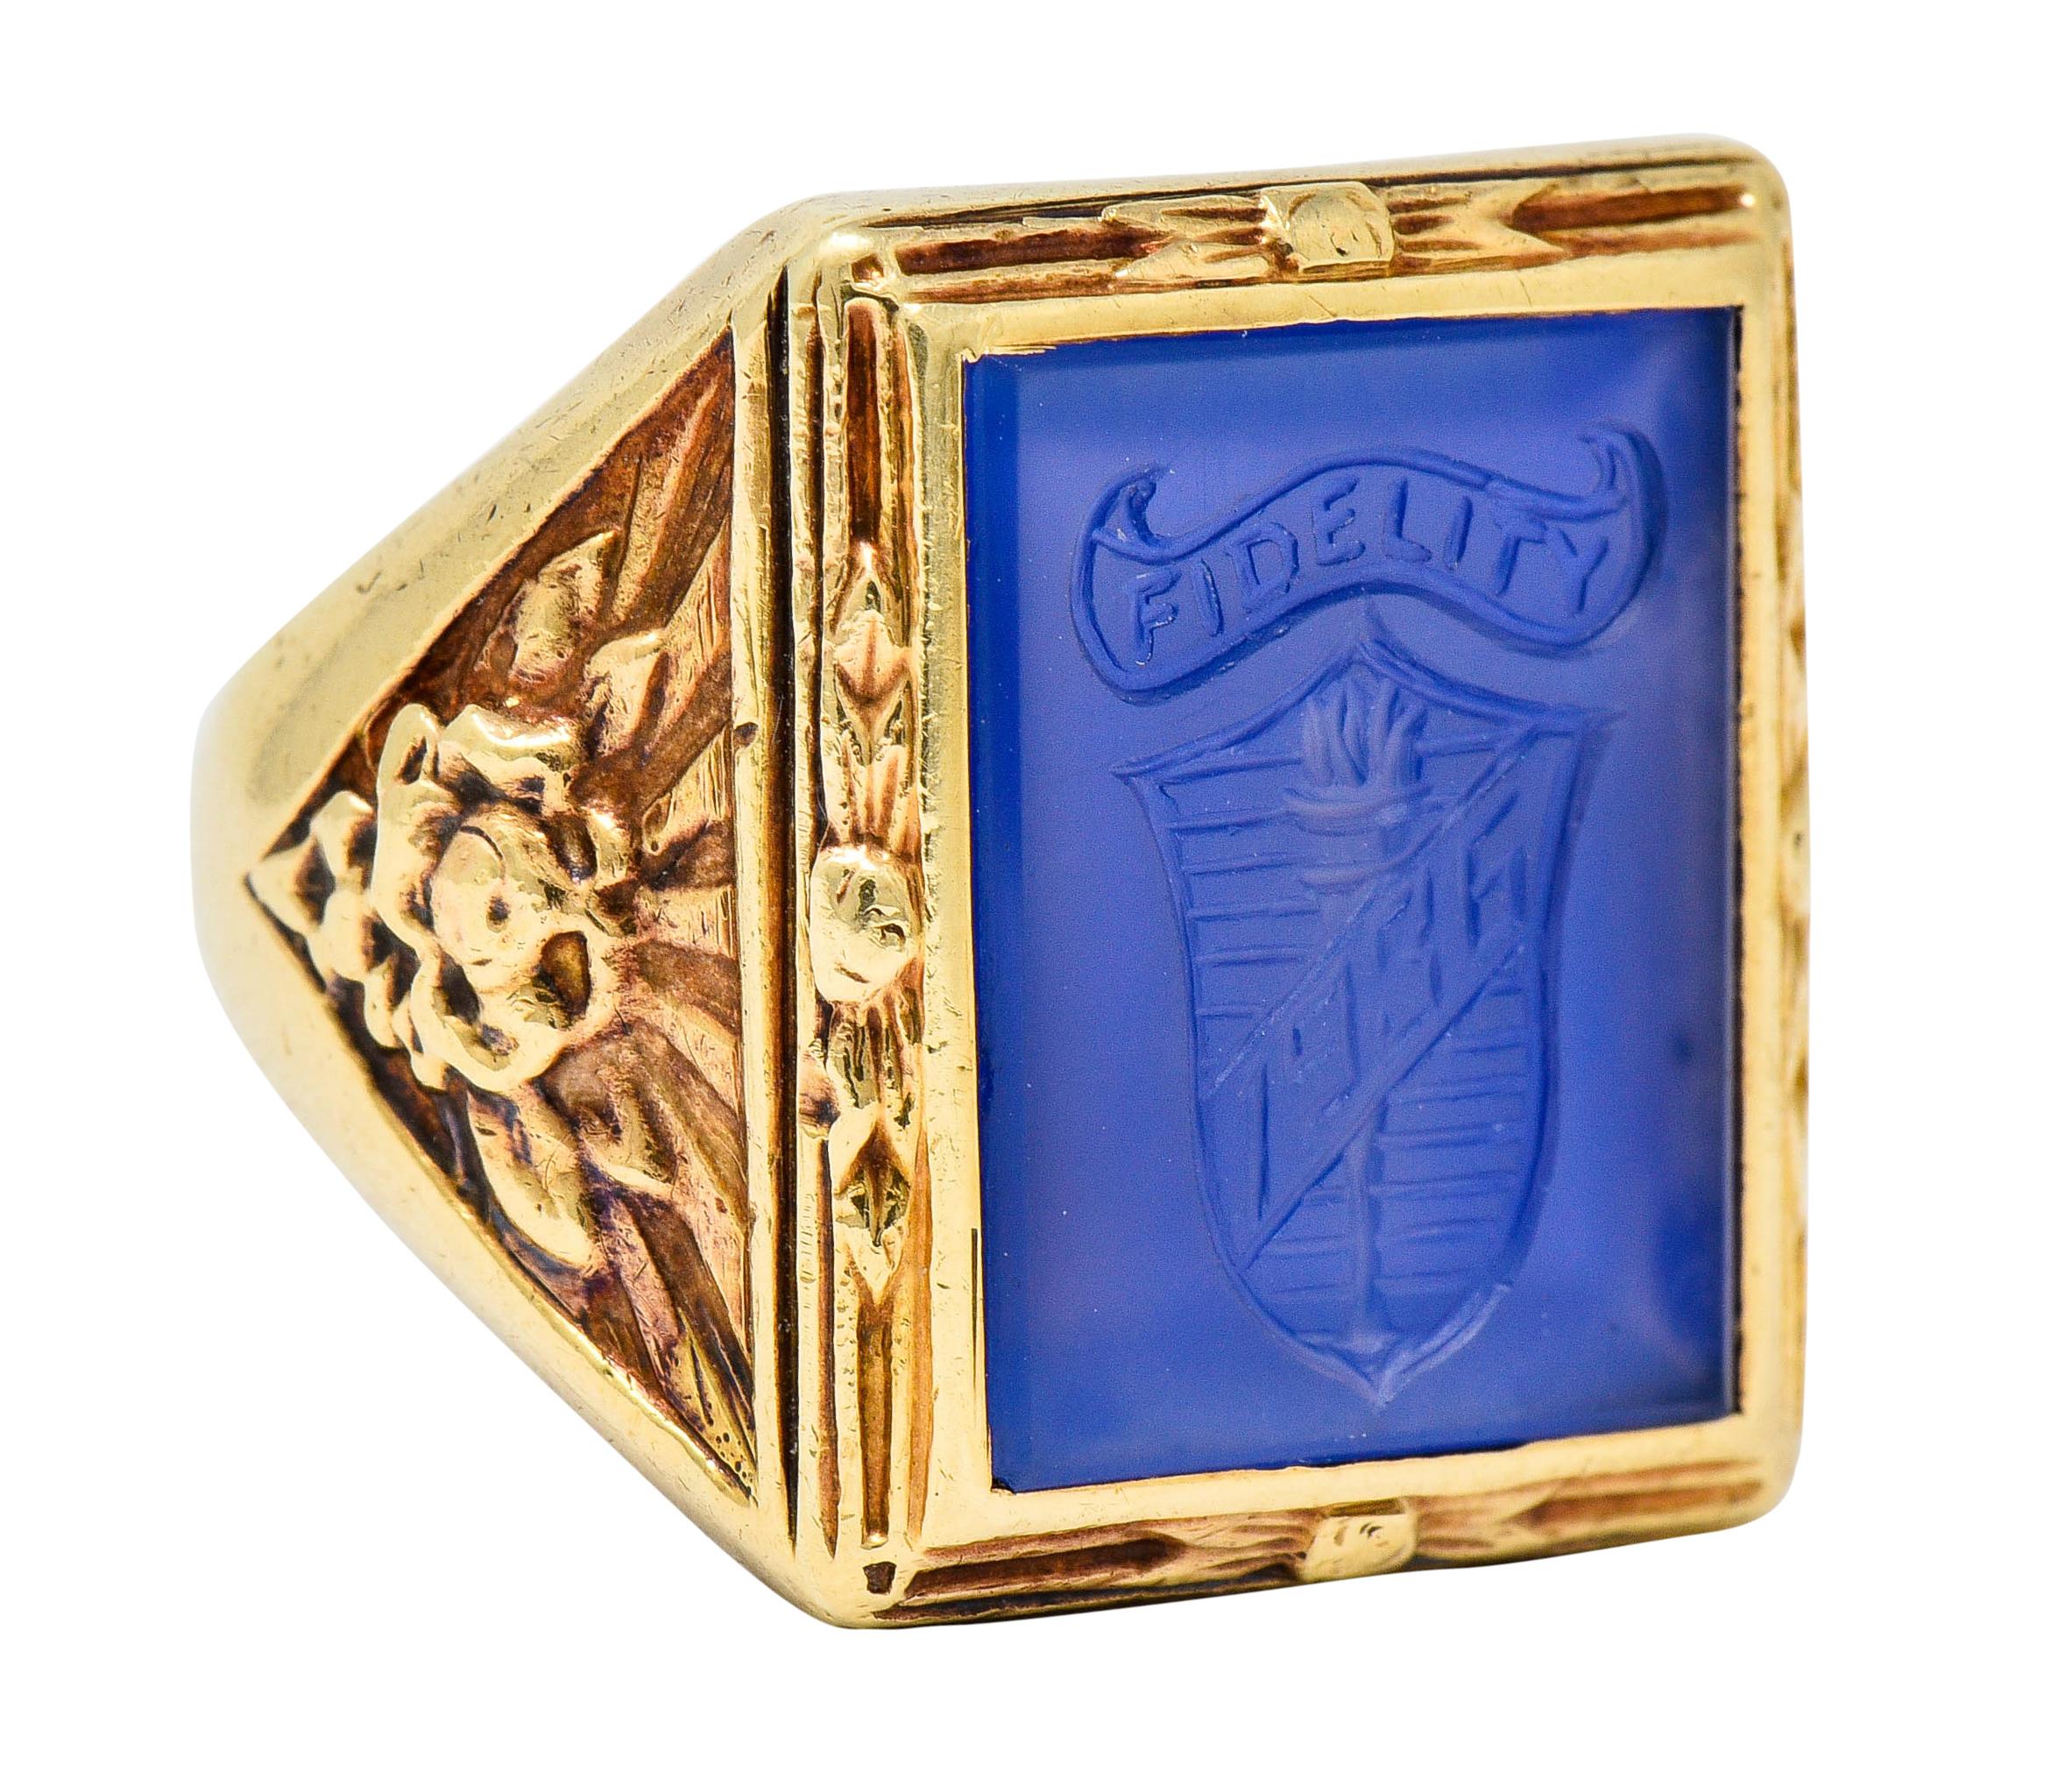 Centering a bezel set rectangular intaglio tablet of chalcedony measuring approximately 14.0 x 11.0 mm

Bright blue in color, dyed, and deeply engraved to depict a striped shield emblazoned by a torch and dated '1936'

Topped by a scrolled ribbon